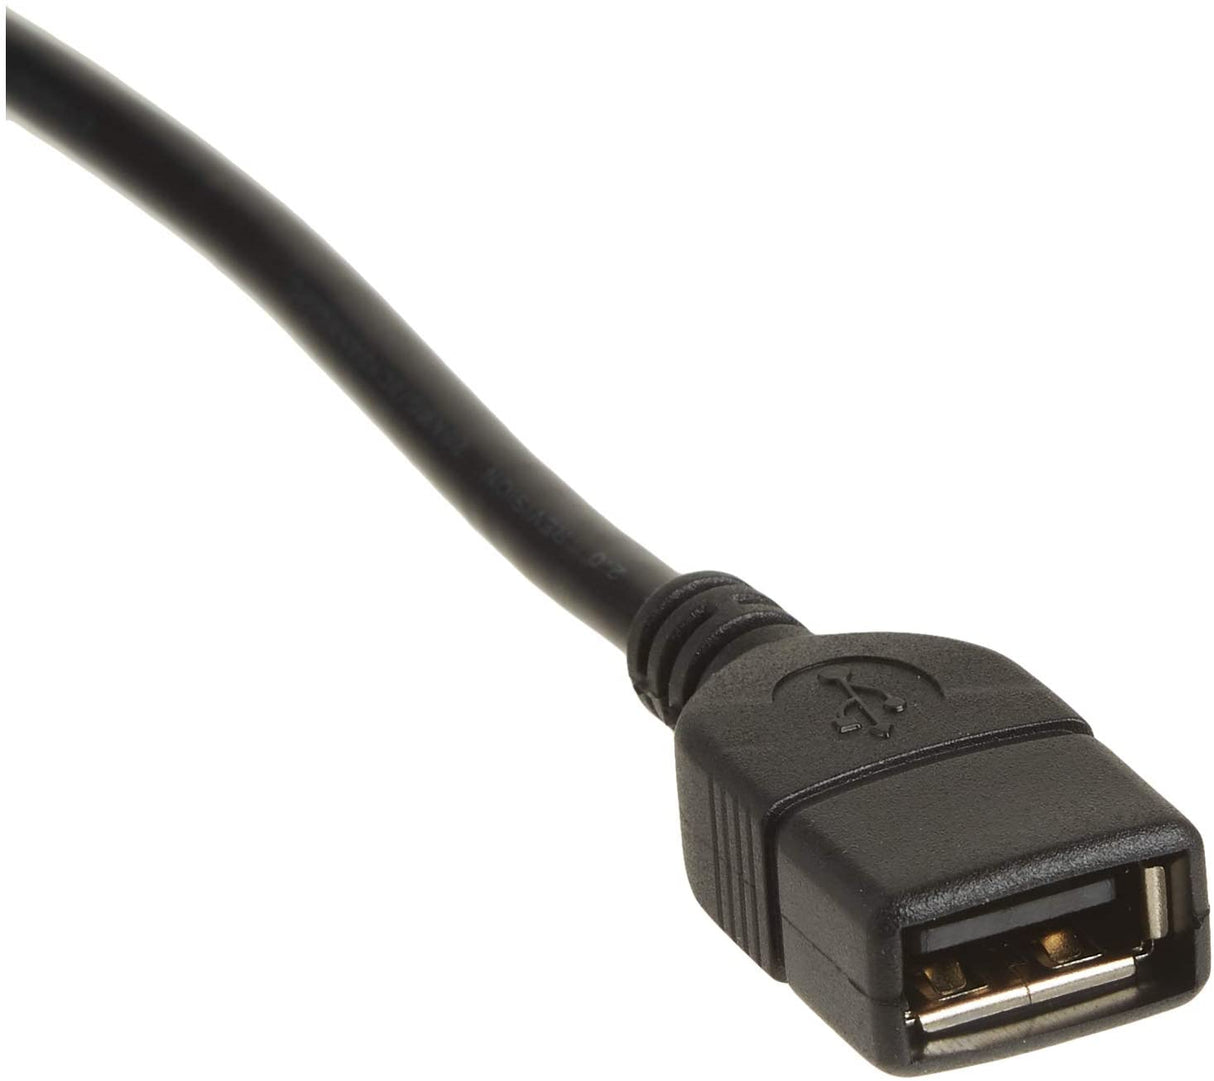 C2g/ cables to go C2G USB Short Extension Cable, USB Cable, USB A to A Cable, Black, 3.28 Feet (1 Meter), Cables to Go 52106 USB A Male to A Female 3.3 Feet Black